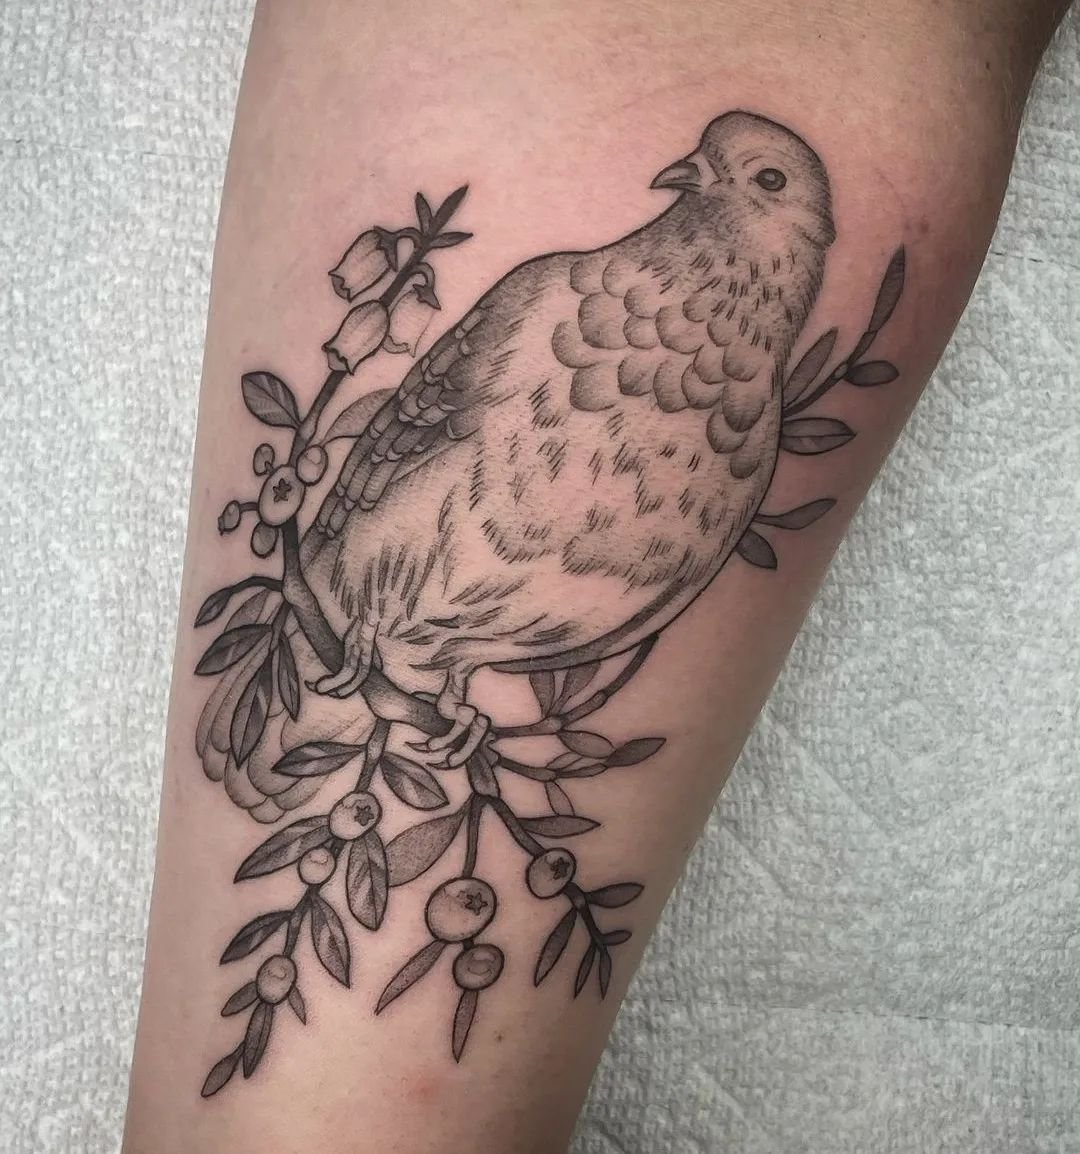 The absolute 🍬sweetest🍬 lil pigeon nestled amongst the berries from Charity!